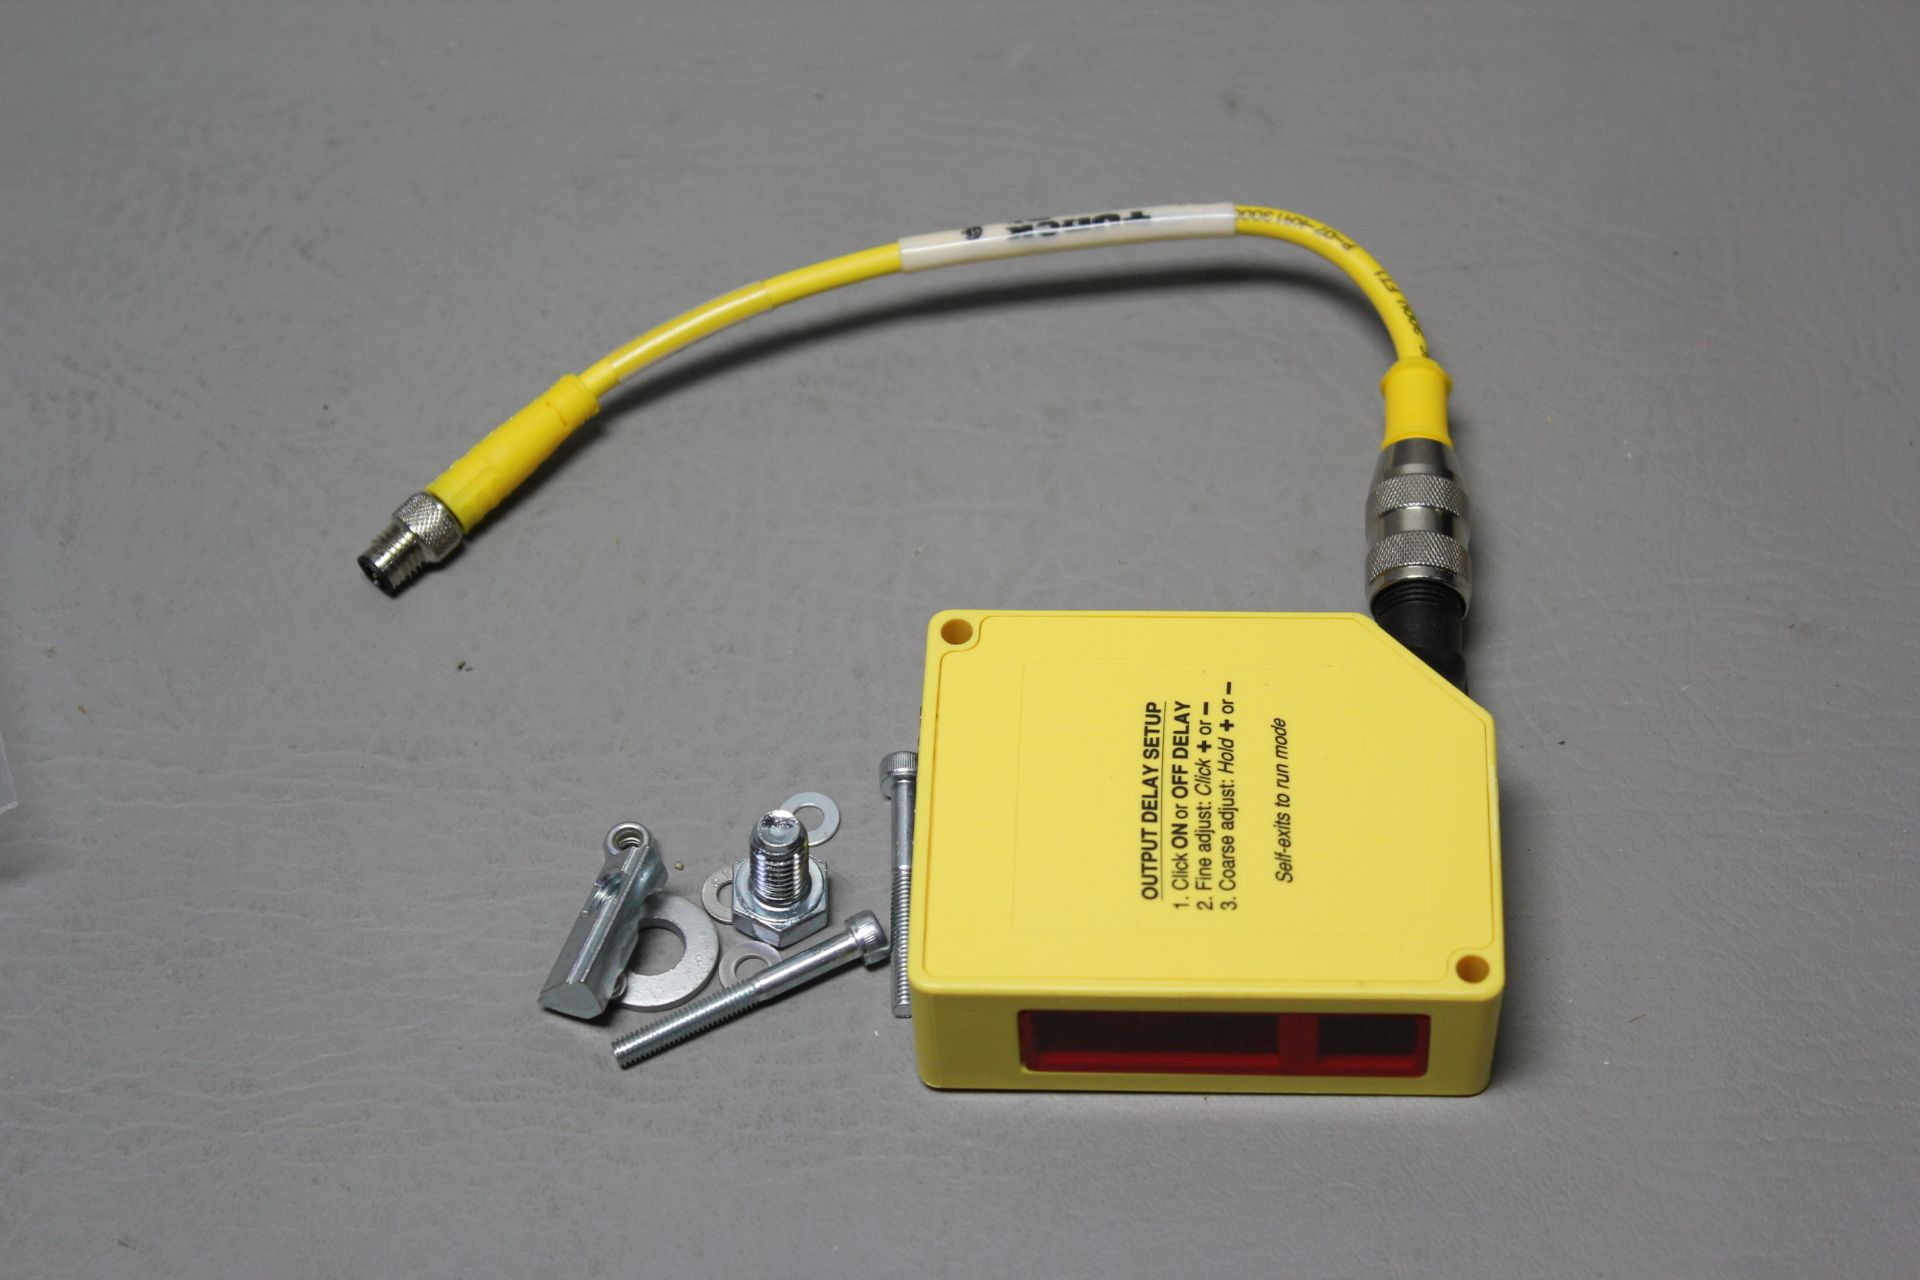 UNUSED BANNER PHOTOELECTRIC SENSOR WITH CABLE - Image 2 of 4